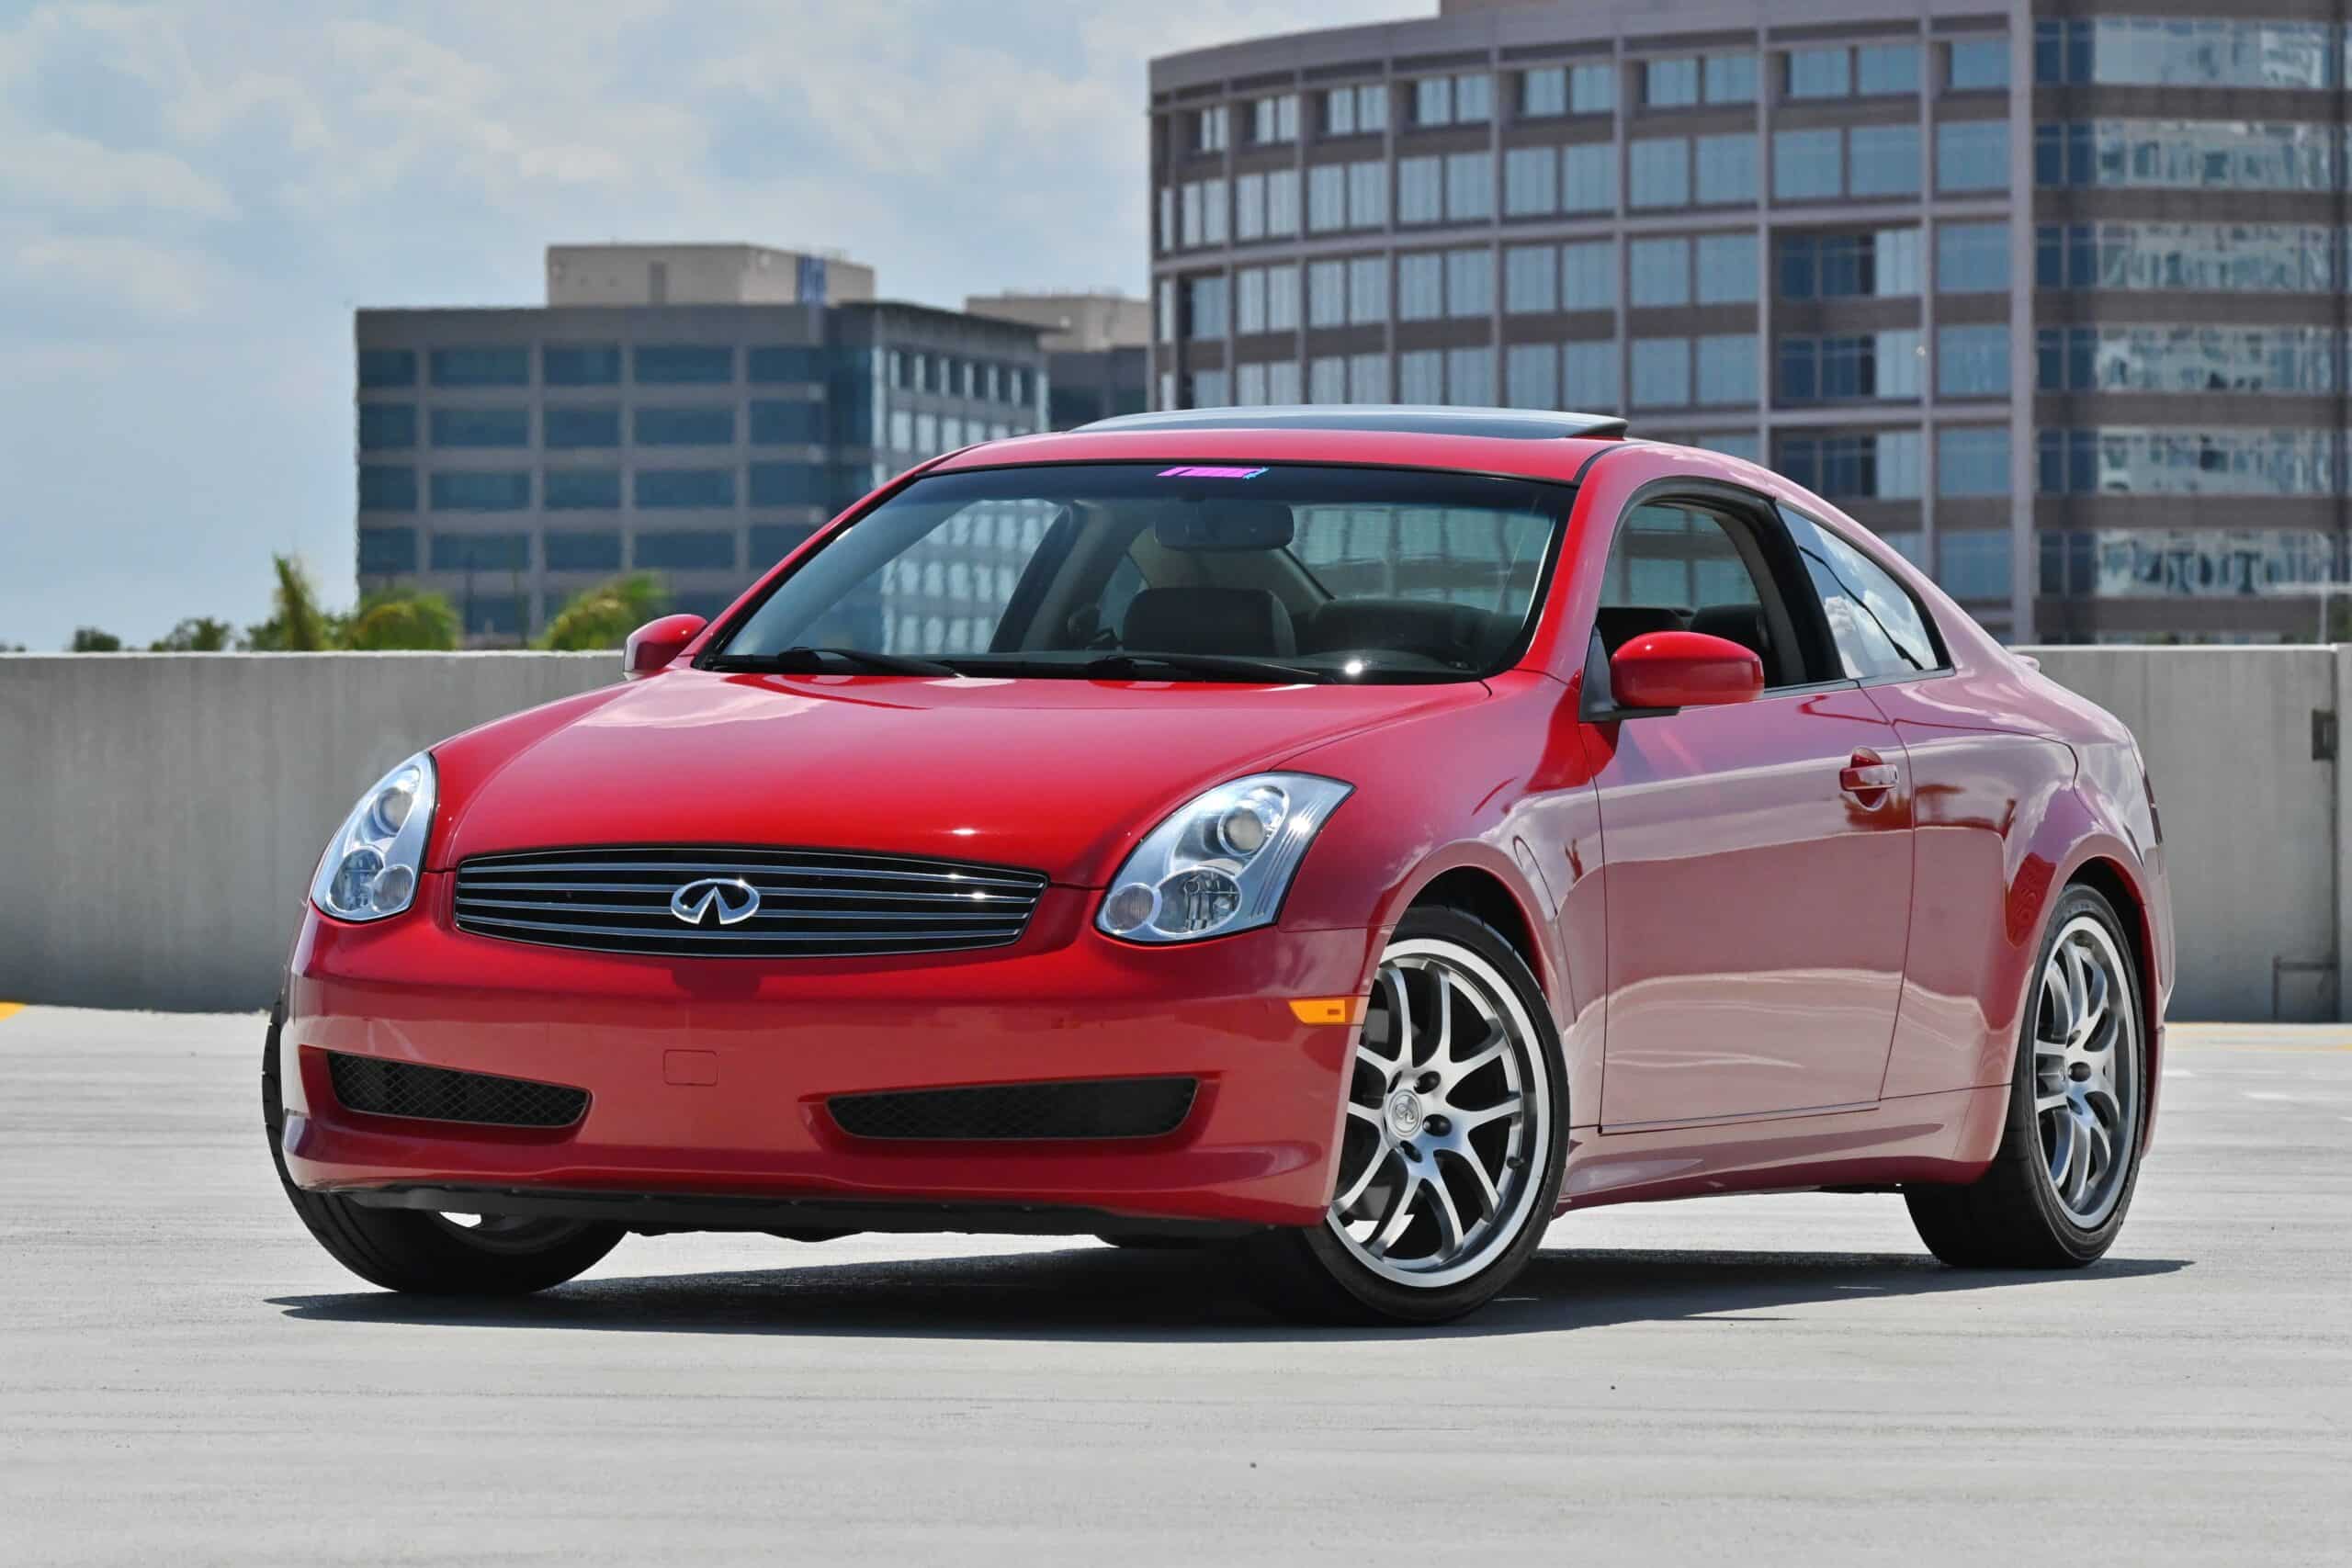 2007 Infiniti G35 6 Speed Only 32K Miles – Last Year G35 Coupe – No modifications – Showroom Condition